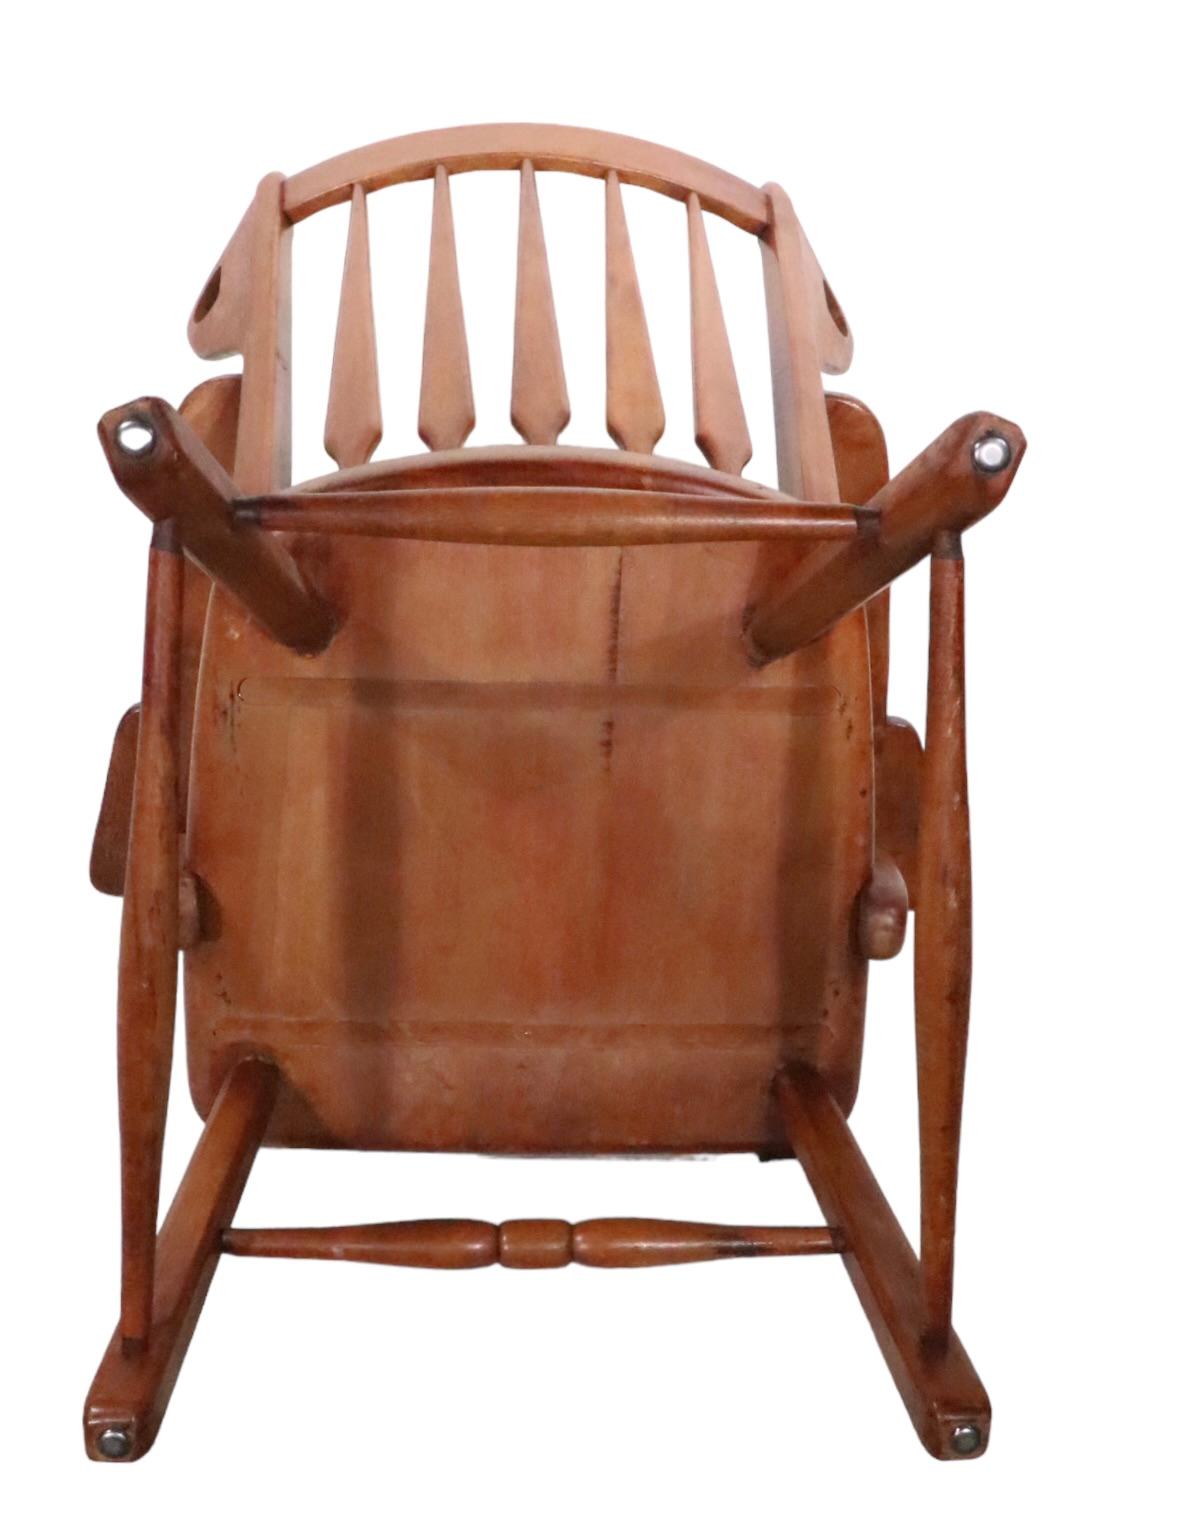 Stylish Rustic  Americana wingback, arrow back,  form lounge chair in solid maple, attributed to Herman de Vries, for Cushman, unsigned. The chair is an example of Modernisms early introduction to mainstream American culture, and was considered very